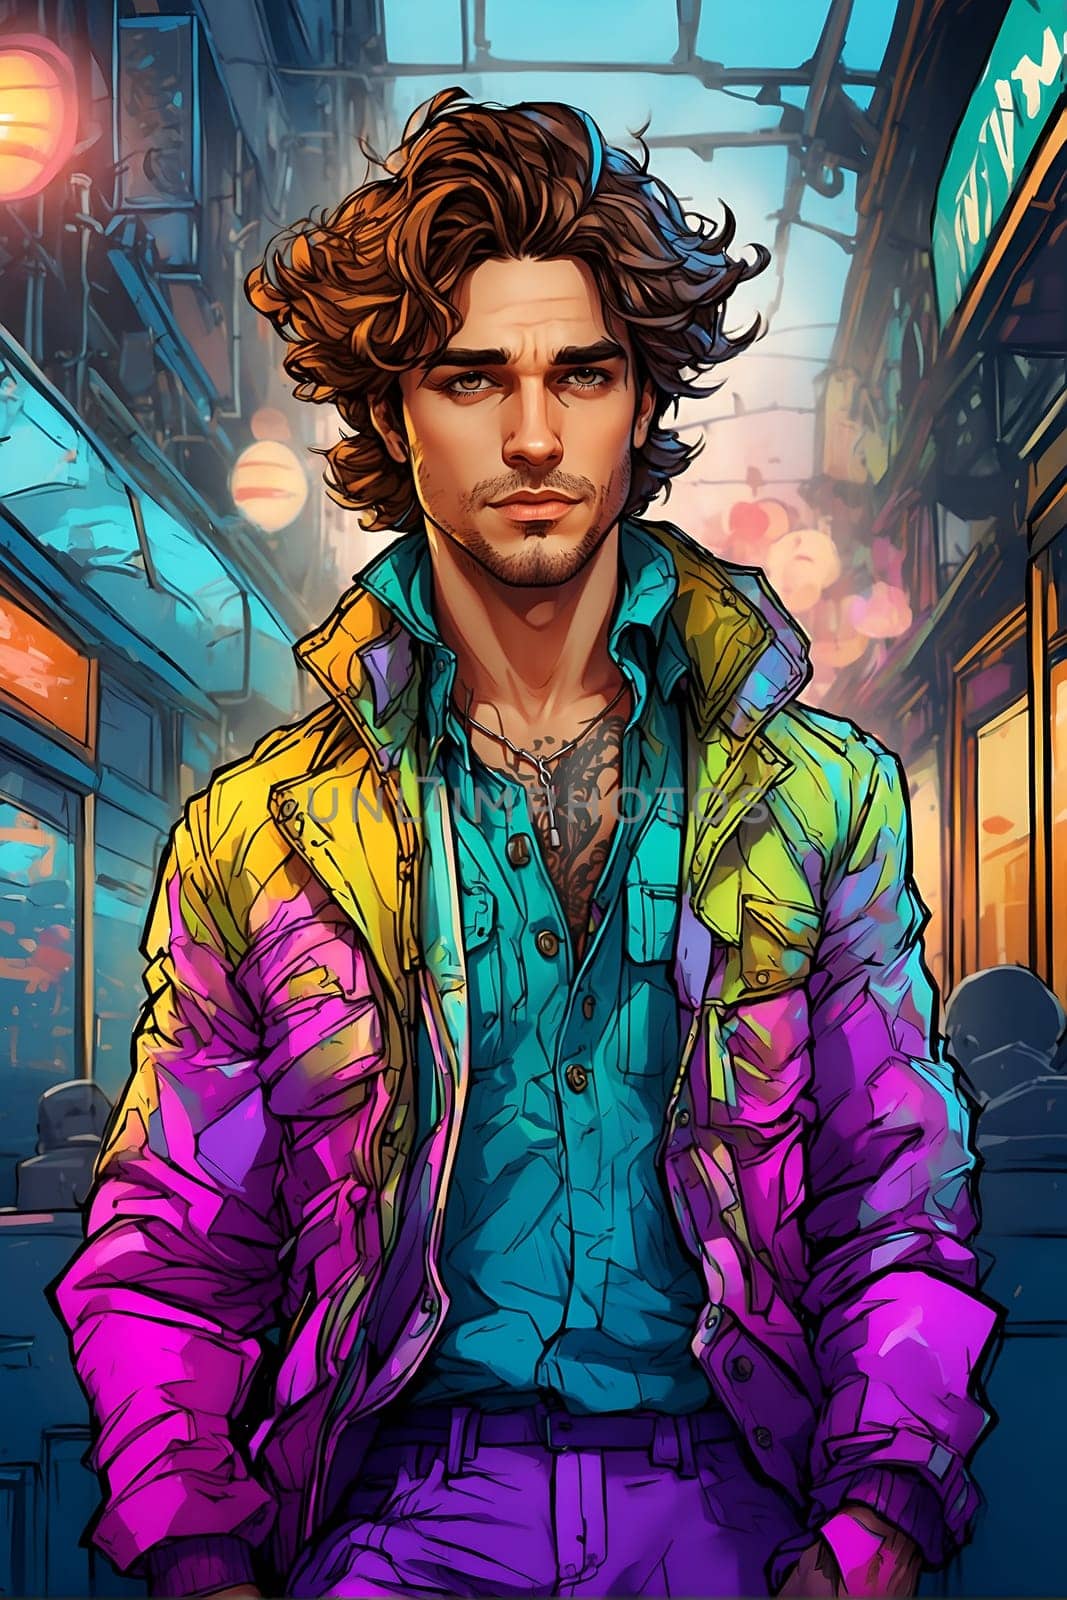 A detailed drawing of a man wearing a vibrant and eye-catching jacket.